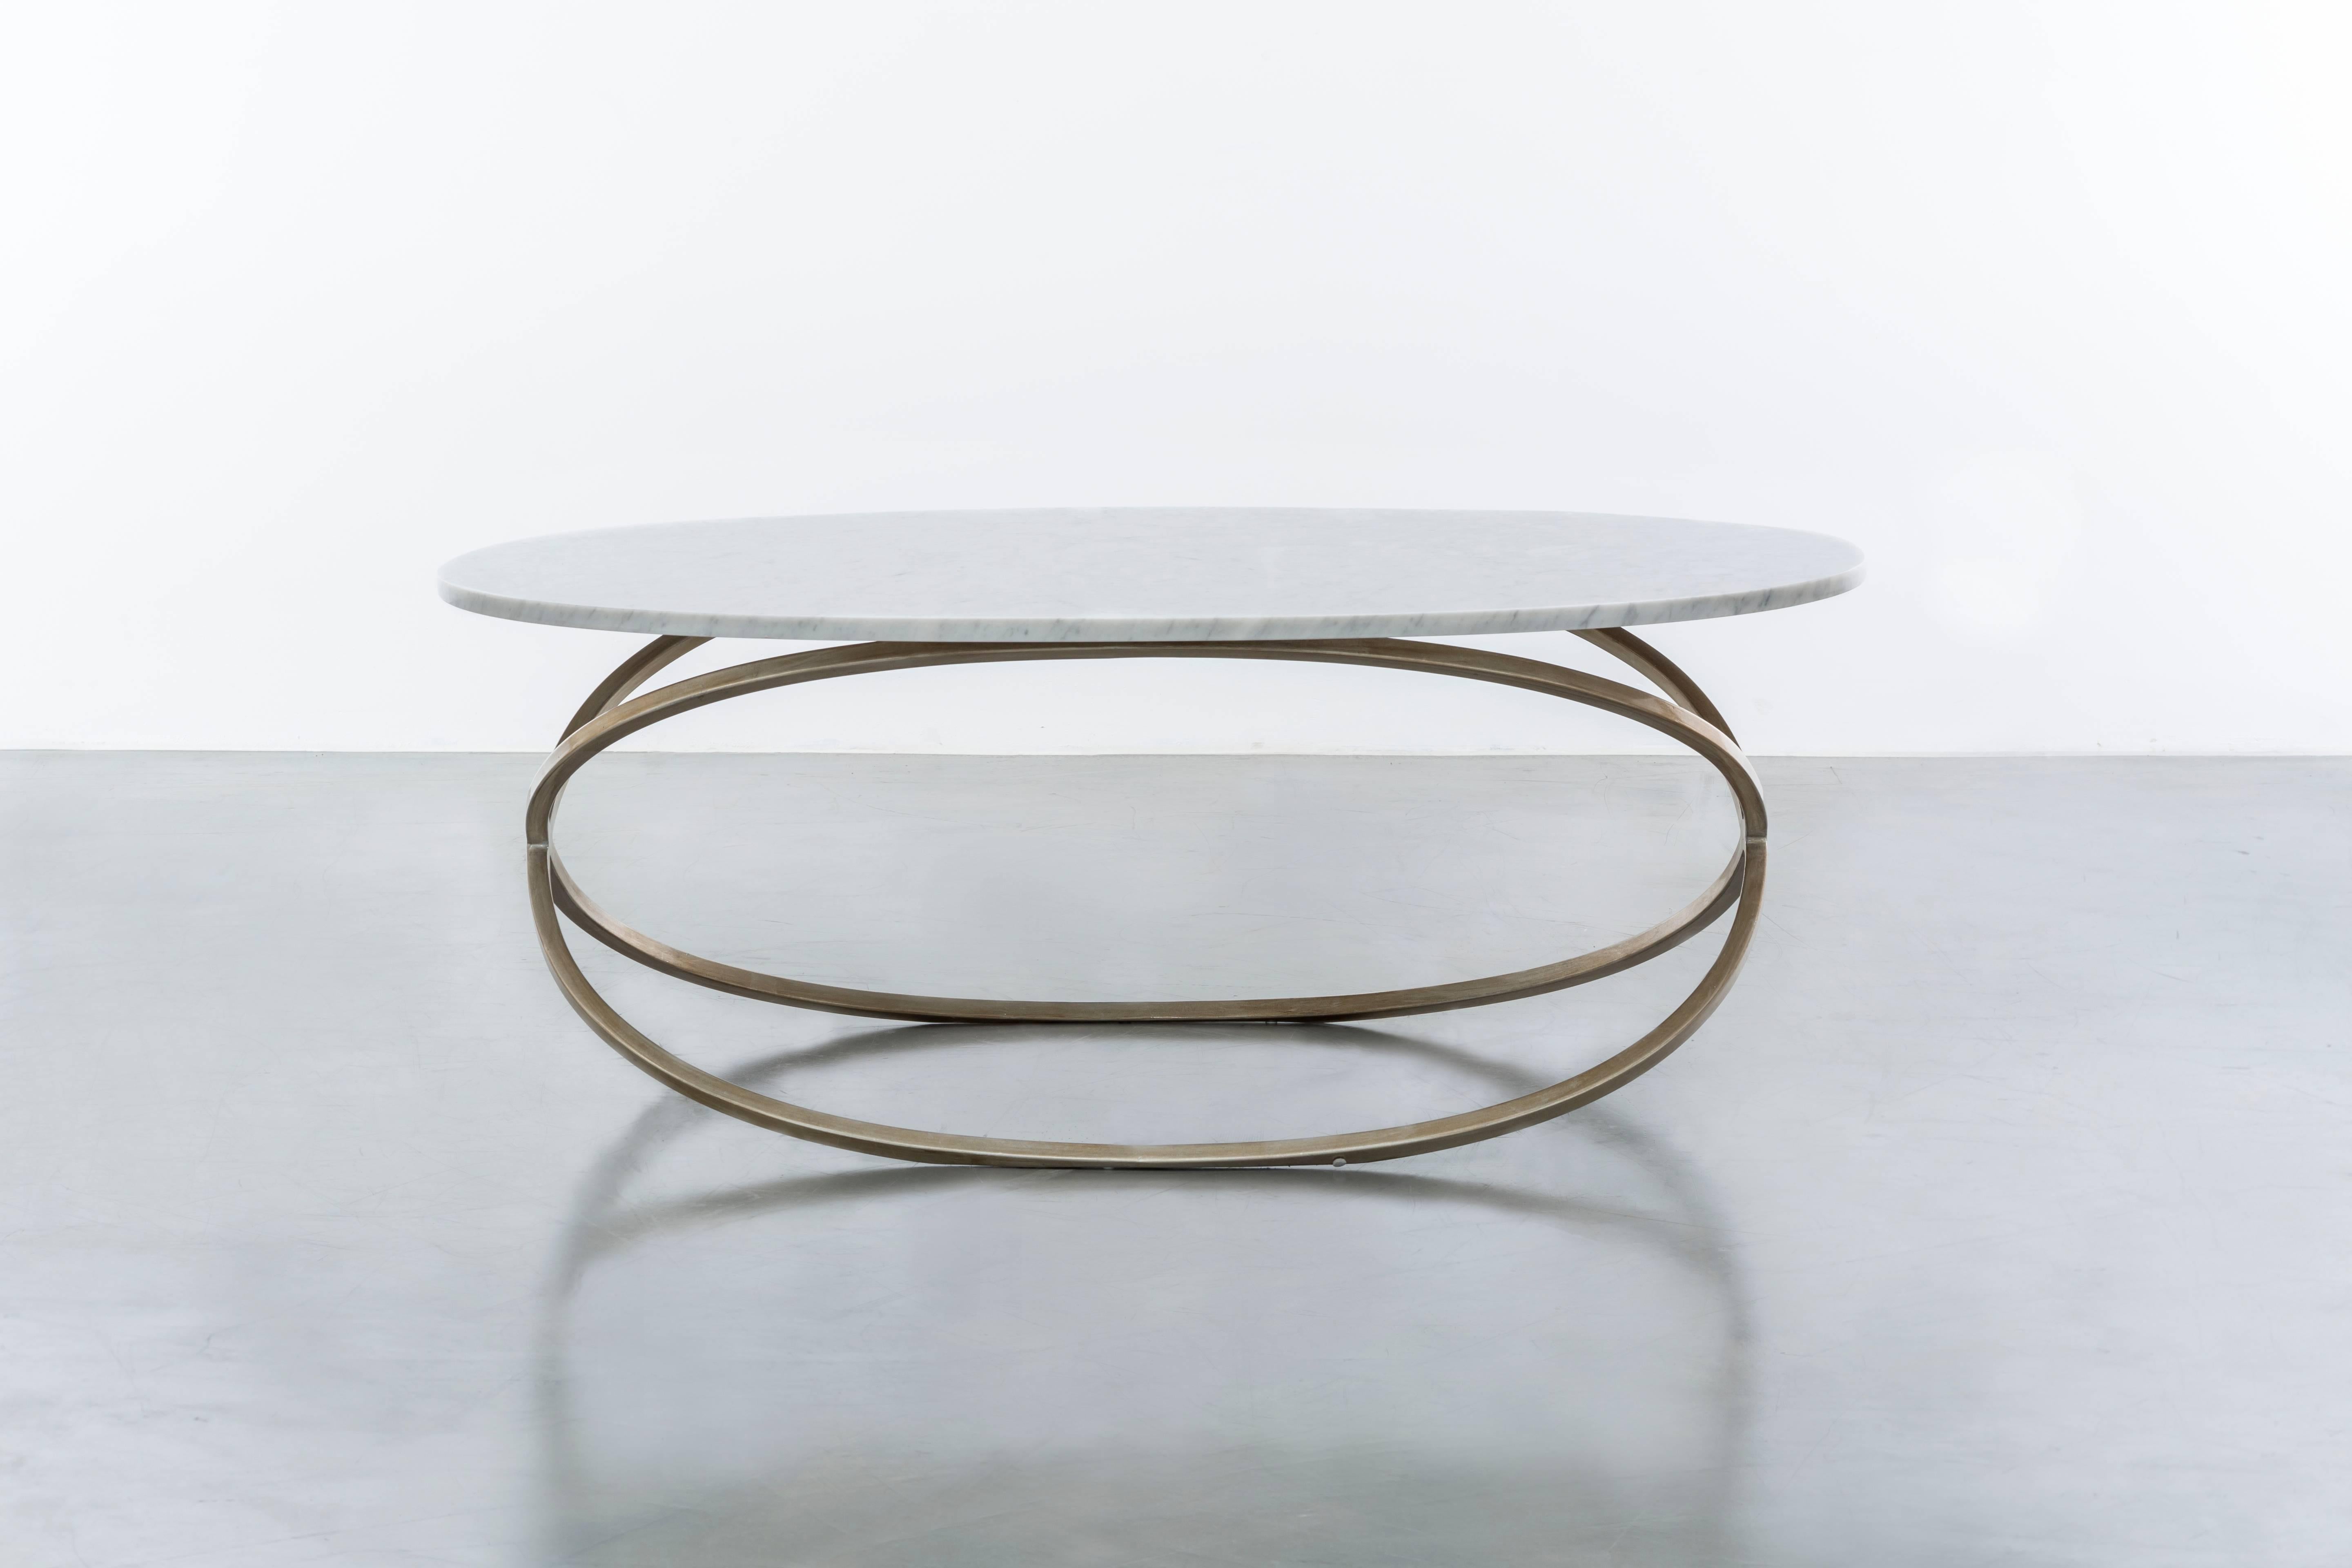 CHANTAL COFFEE TABLE - Modern Oval Cocktail Table with Carrara Marble

The Chantal coffee table is a sleek and modern oval-shaped cocktail table that features a luxurious Carrara marble top. It is made to order in California and fully customizable